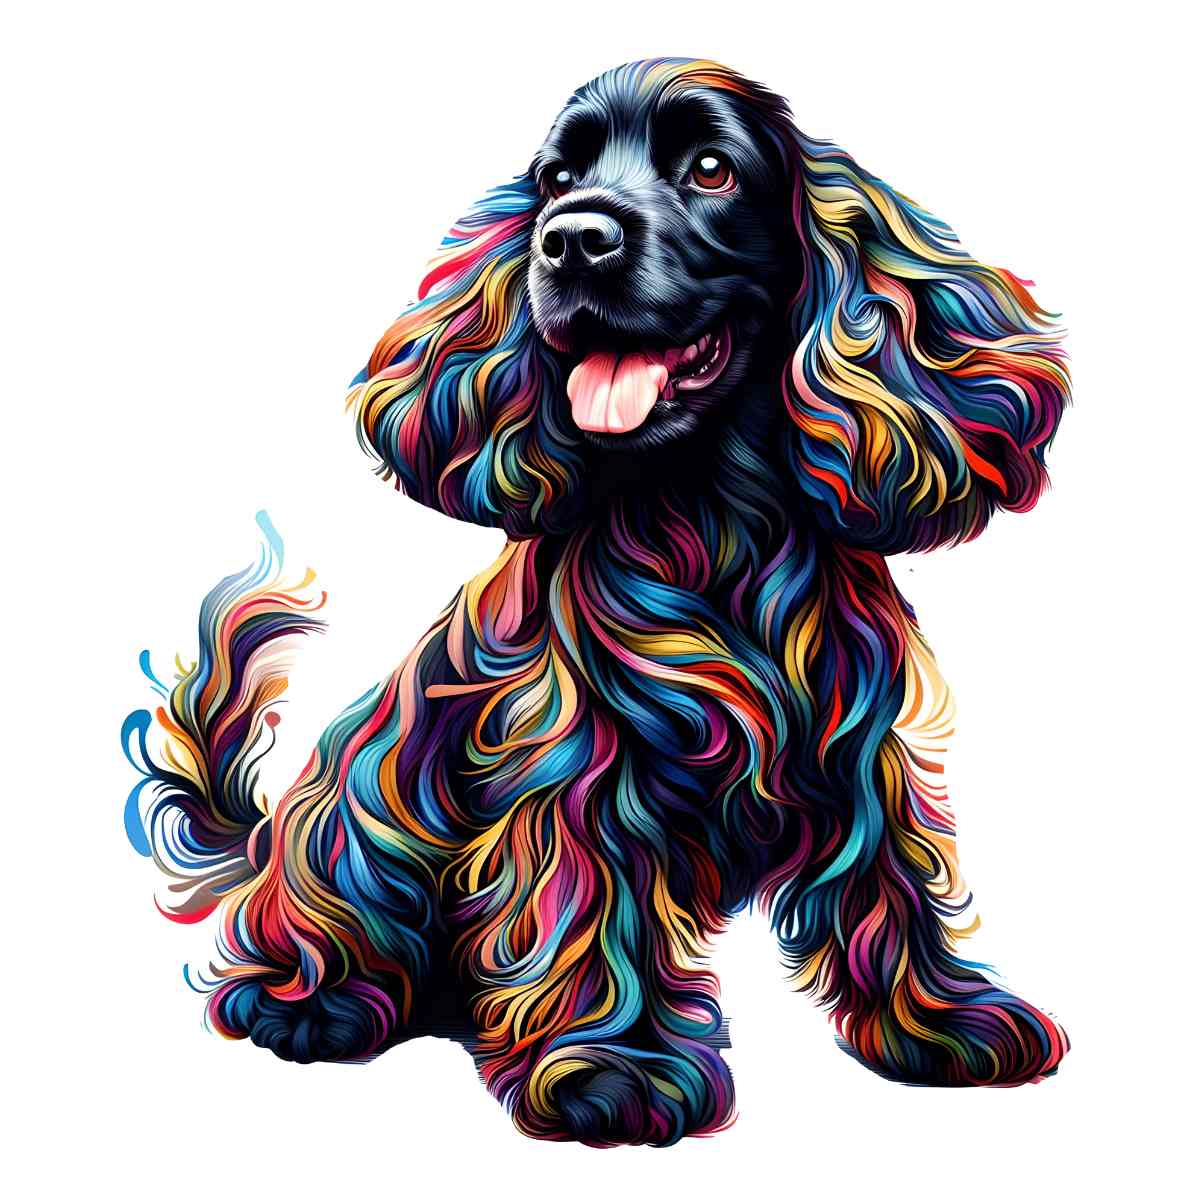 Animal Jigsaw Puzzle > Wooden Jigsaw Puzzle > Jigsaw Puzzle A4 Black Cocker Spaniel Dog - Jigsaw Puzzle